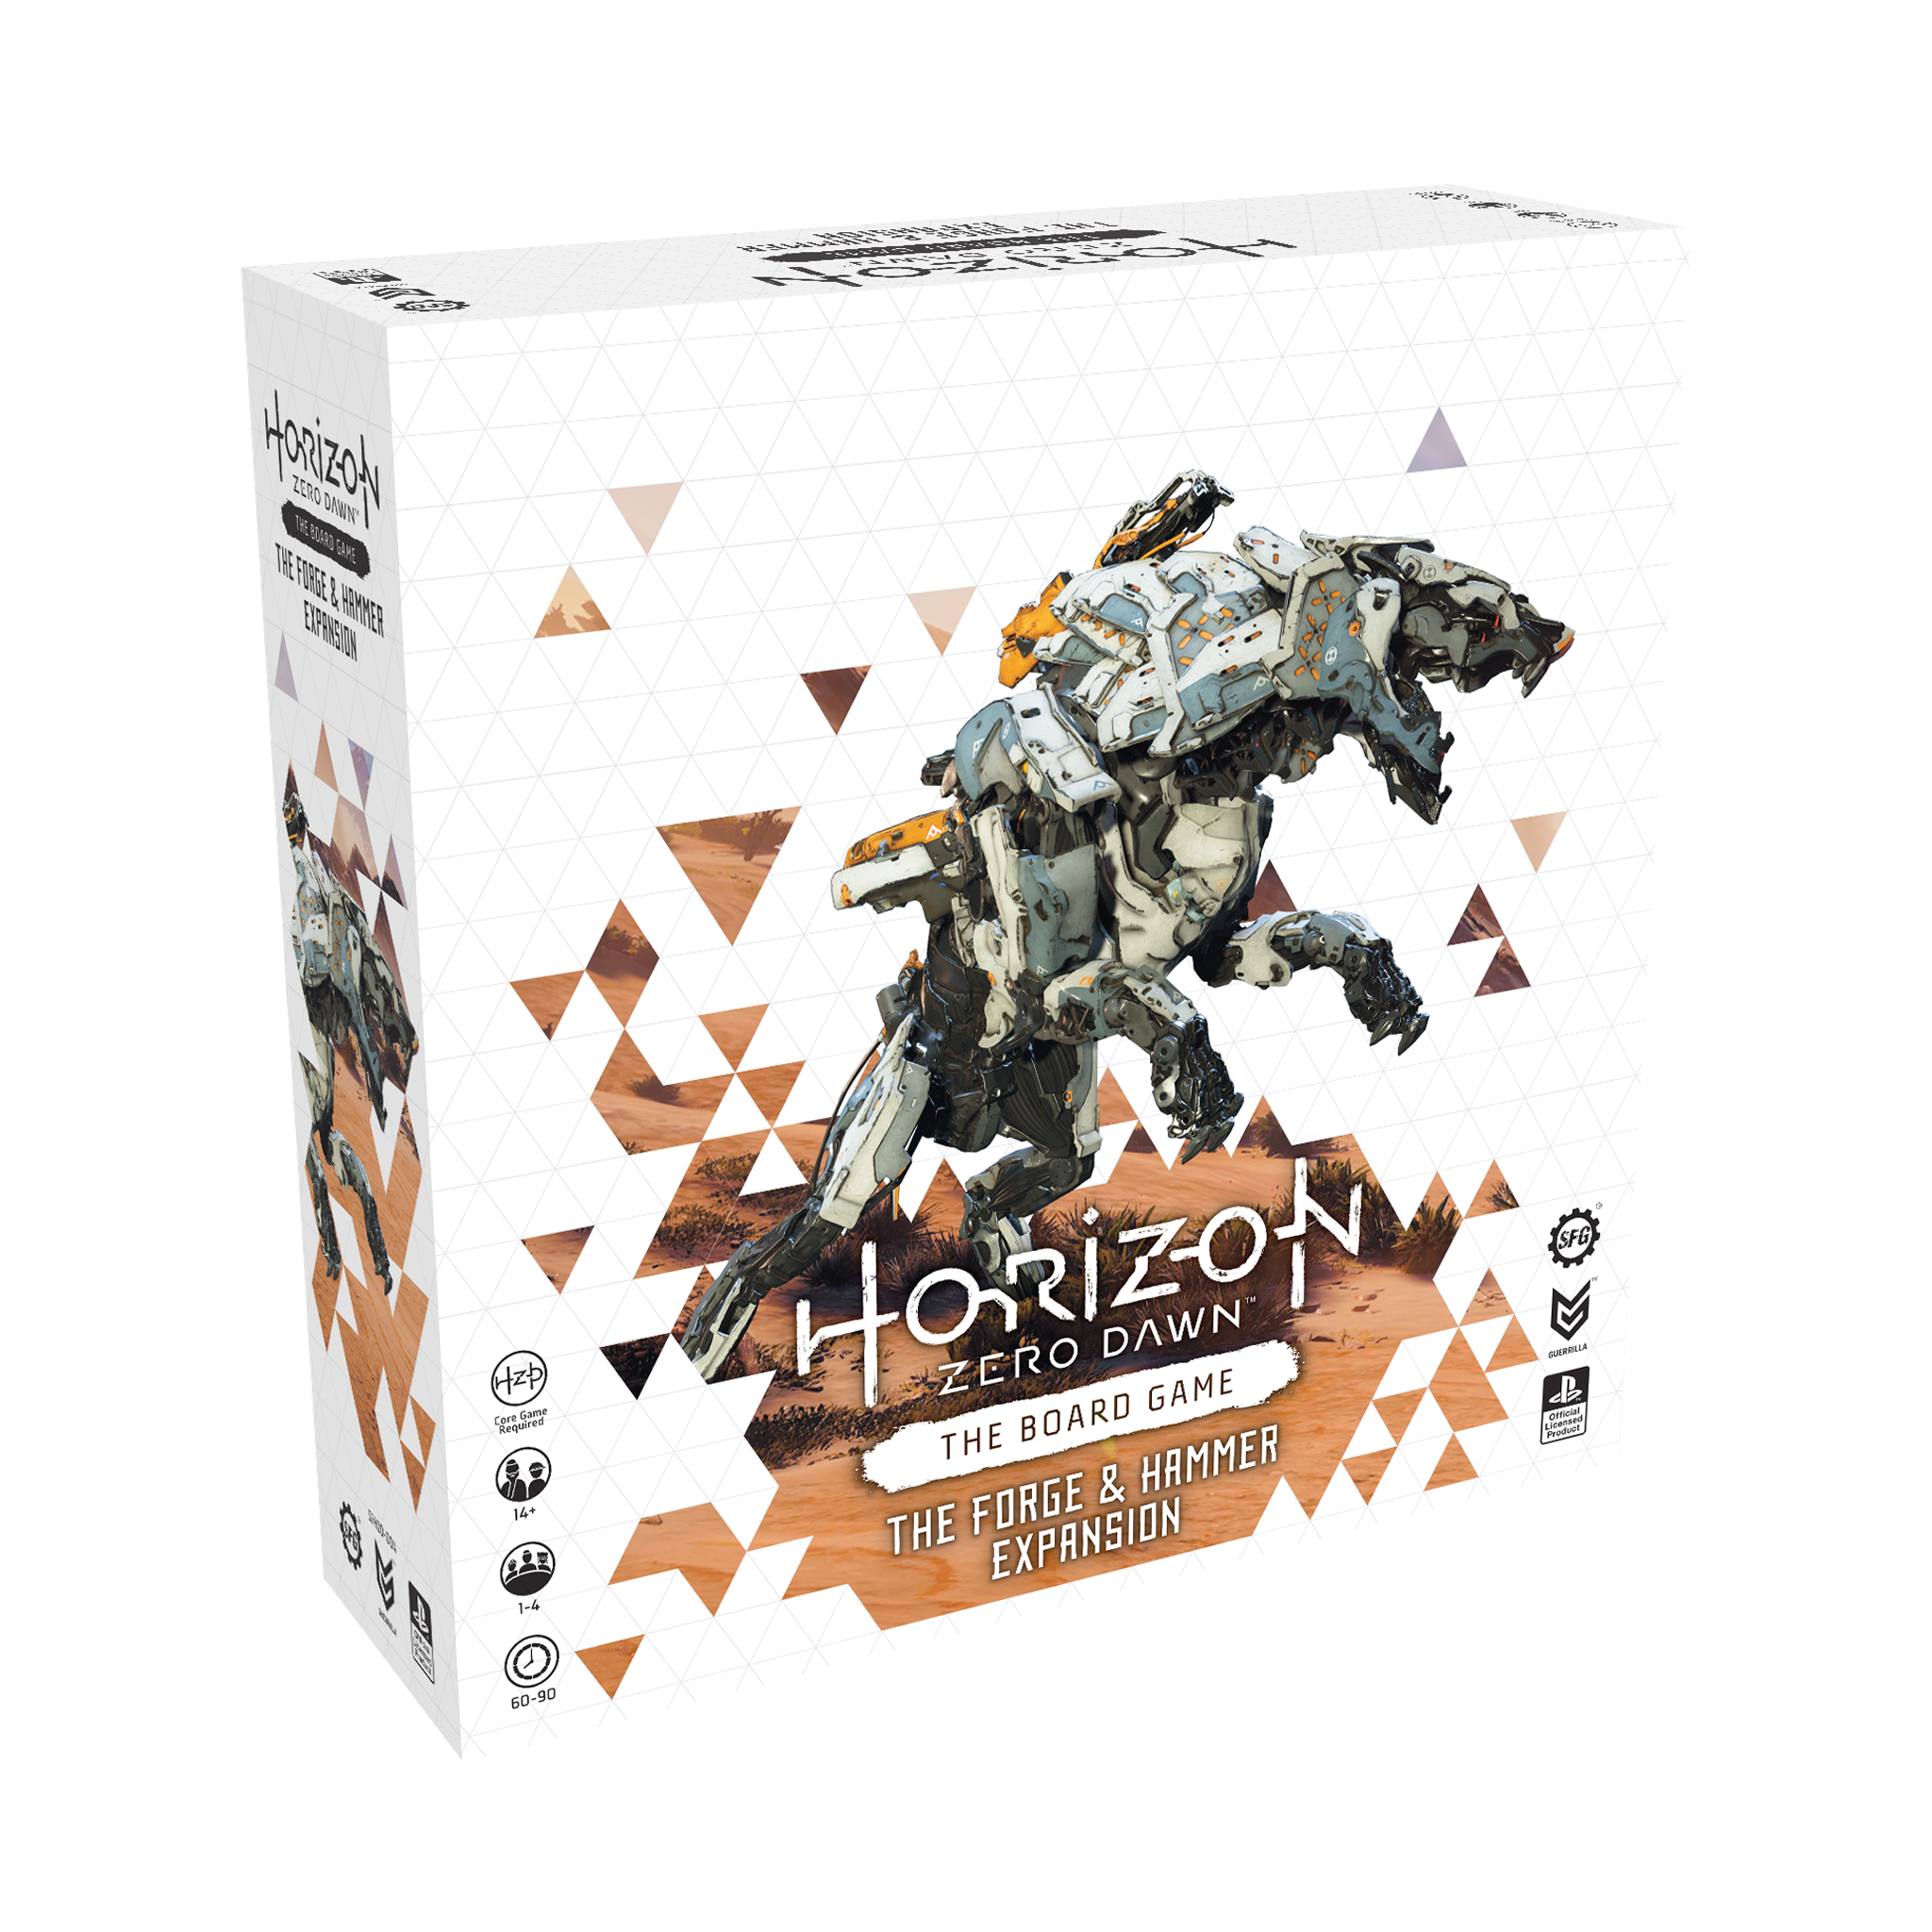 Horizon Zero Dawn Board Game - The Forge and Hammer Expansion